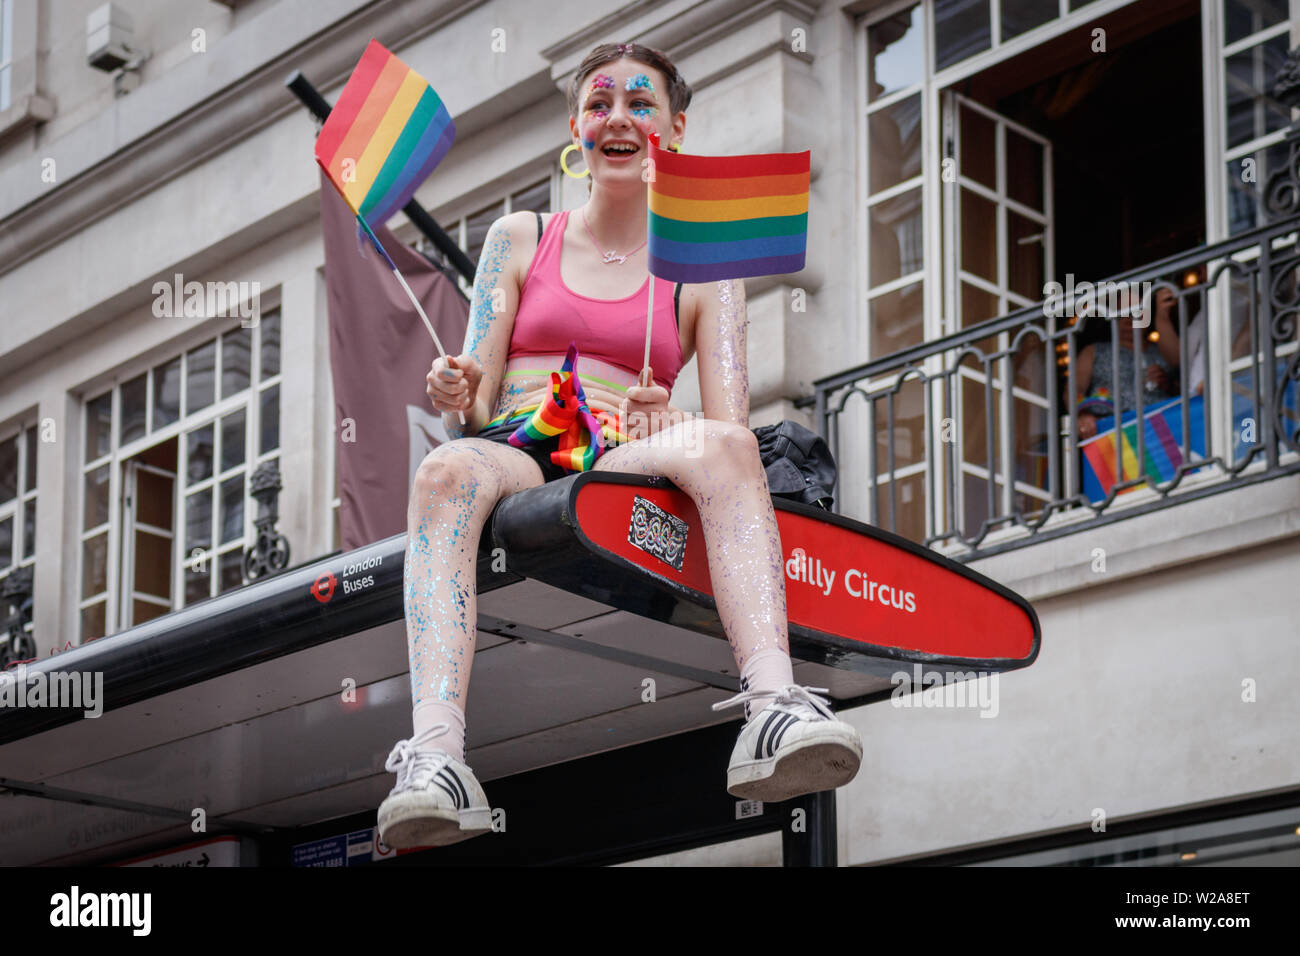 London, England, UK. 6th July, 2019. A girl watches from a bus stop, while waving rainbow flags during the parade.The Pride in London 2019 Parade Day is a London-based event held by Pride in London. It is a parade of people of all genders, sexualities, races, nationalities, backgrounds and faiths coming together for the UK's biggest Pride celebration. Central London was covered in rainbow-themed decorations, signifying inclusiveness. Credit: Belinda Jilao/SOPA Images/ZUMA Wire/Alamy Live News Stock Photo